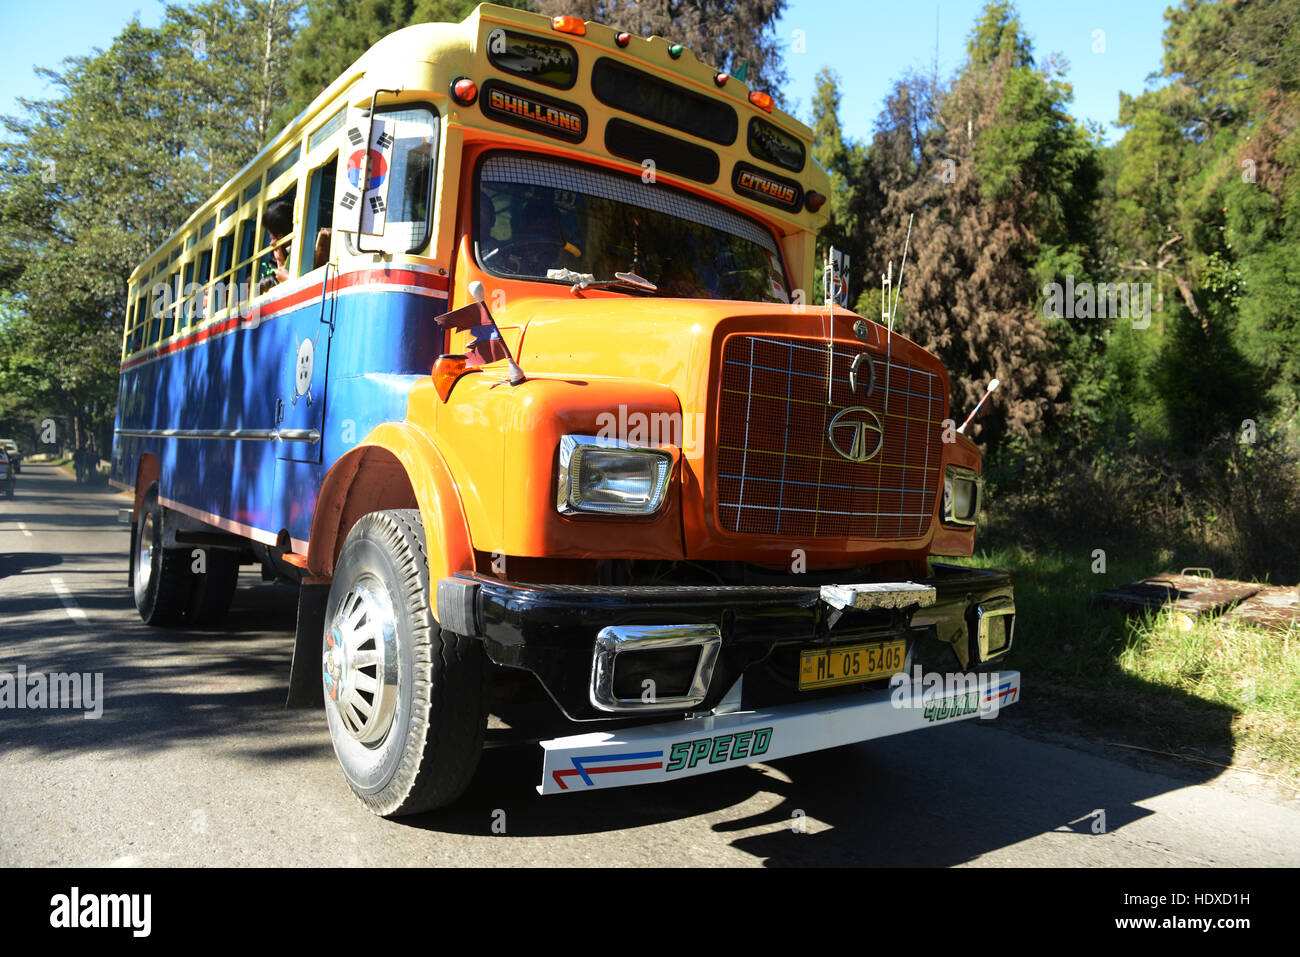 Old Bus India Stock Photos & Old Bus India Stock Images - Alamy